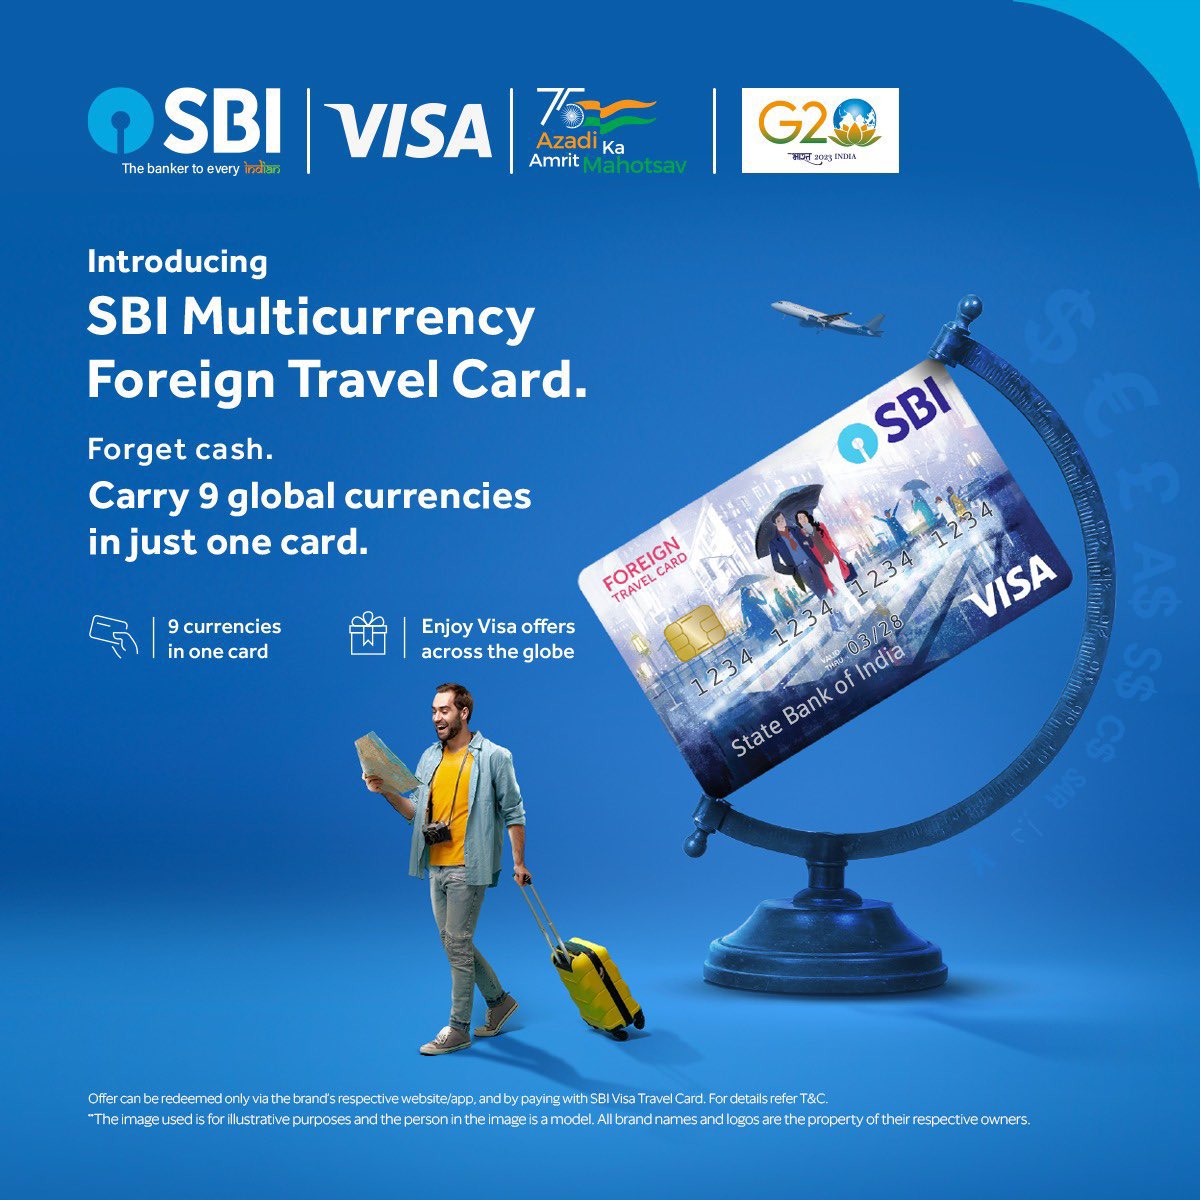 The power of 9 currencies in 1 card! 
Experience the ease of transacting online/offline worldwide using the SBI Multicurrency Foreign Travel Card.
@Visa_IND 

#SBI #ForeignTravel #9inOne 
#MulticurrencyForeignTravelCard
#StateBankMulticurrencyForeignTravelCard